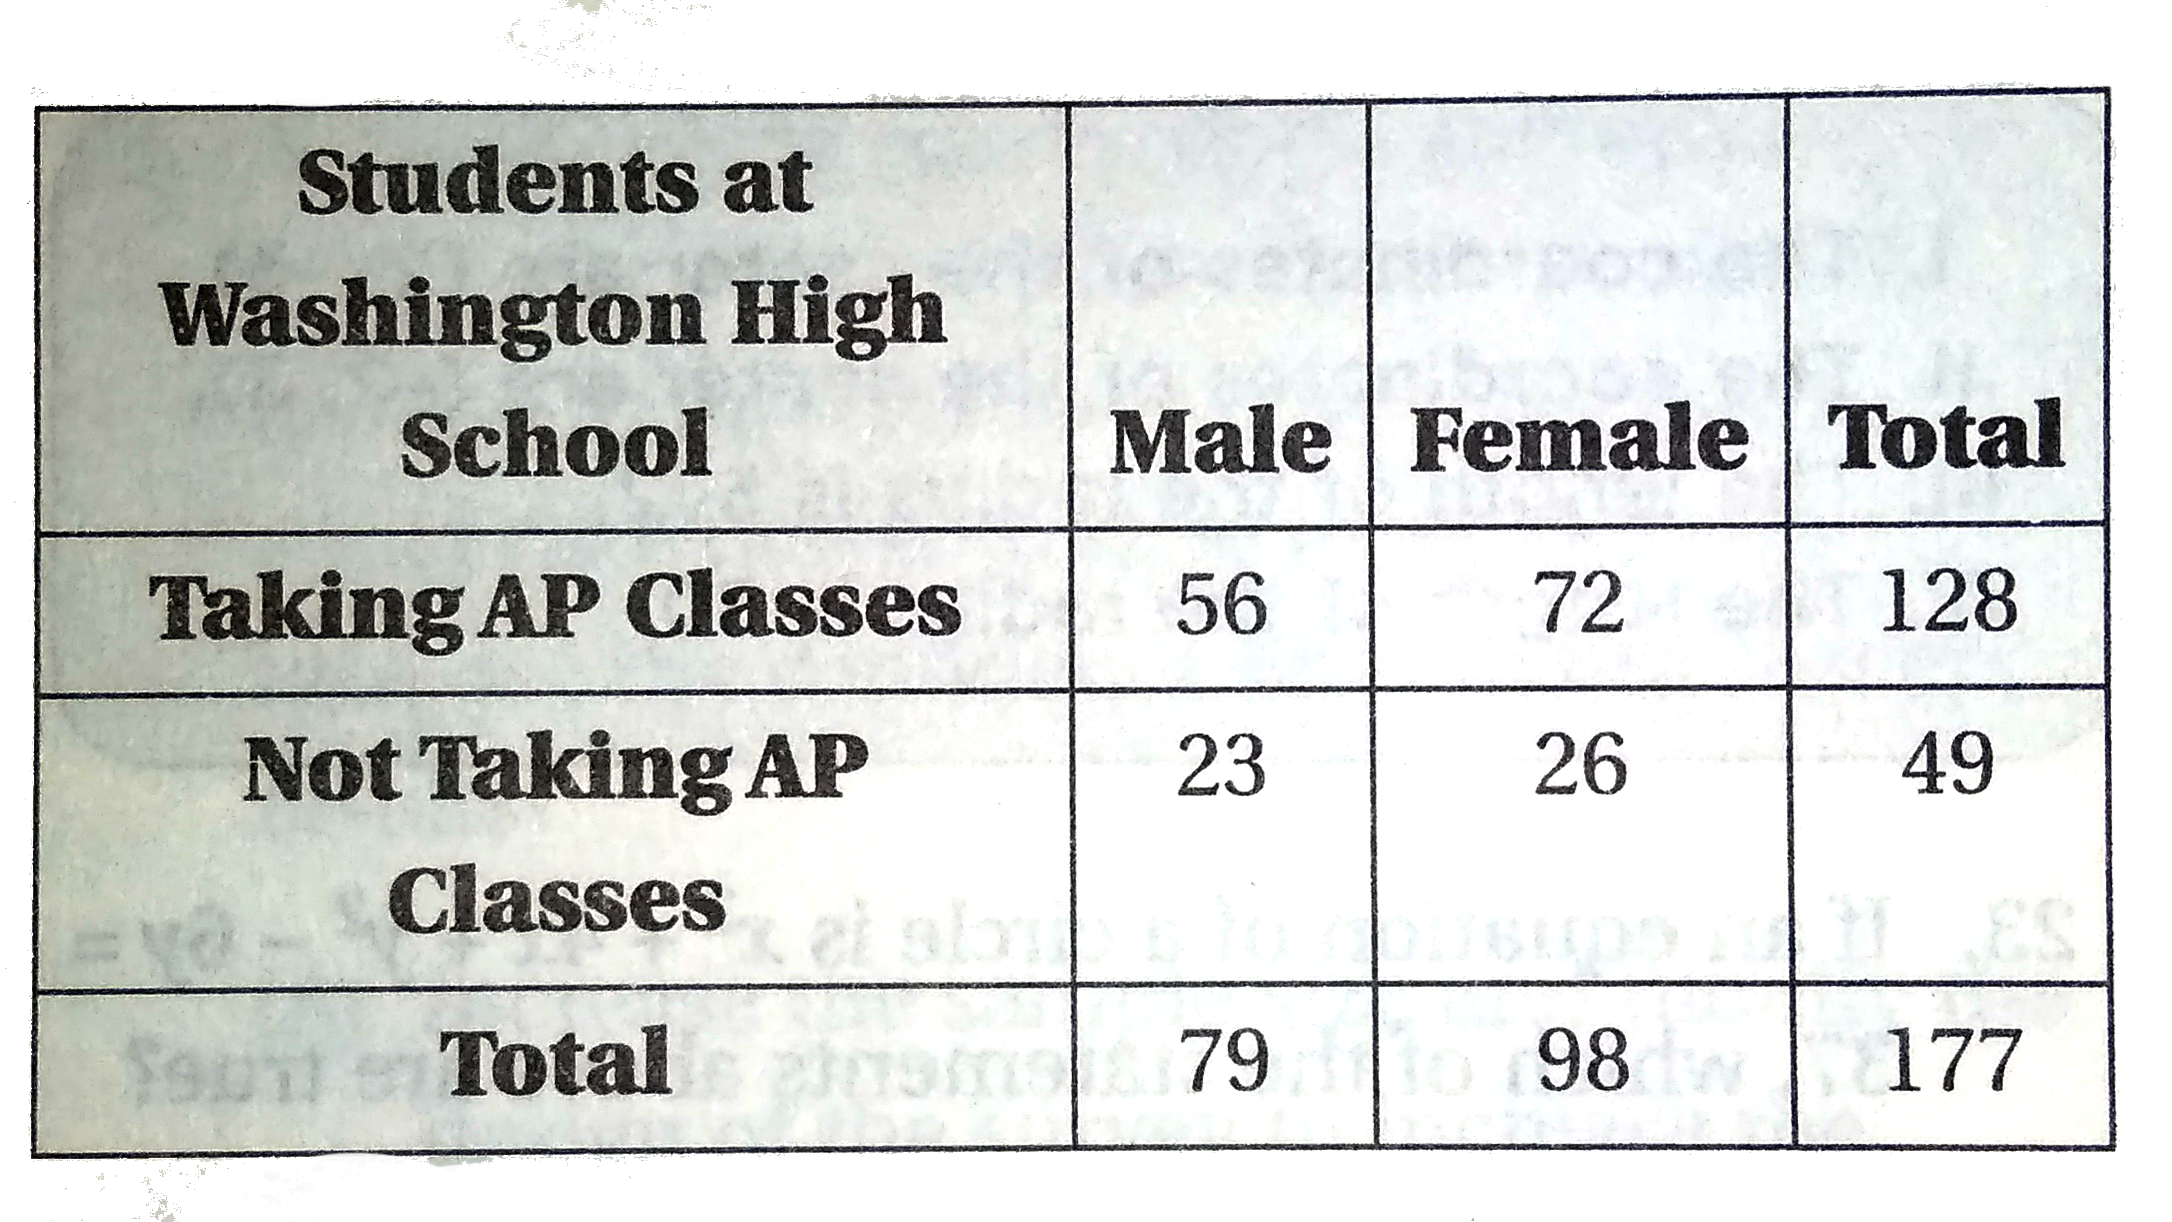 The table above gives the number of male and female students at Washington High School who are taking Advanced Placement (AP) classes and those who are not. What is the proportions of the total number of students at the school who are both male and NOT taking AP classes?